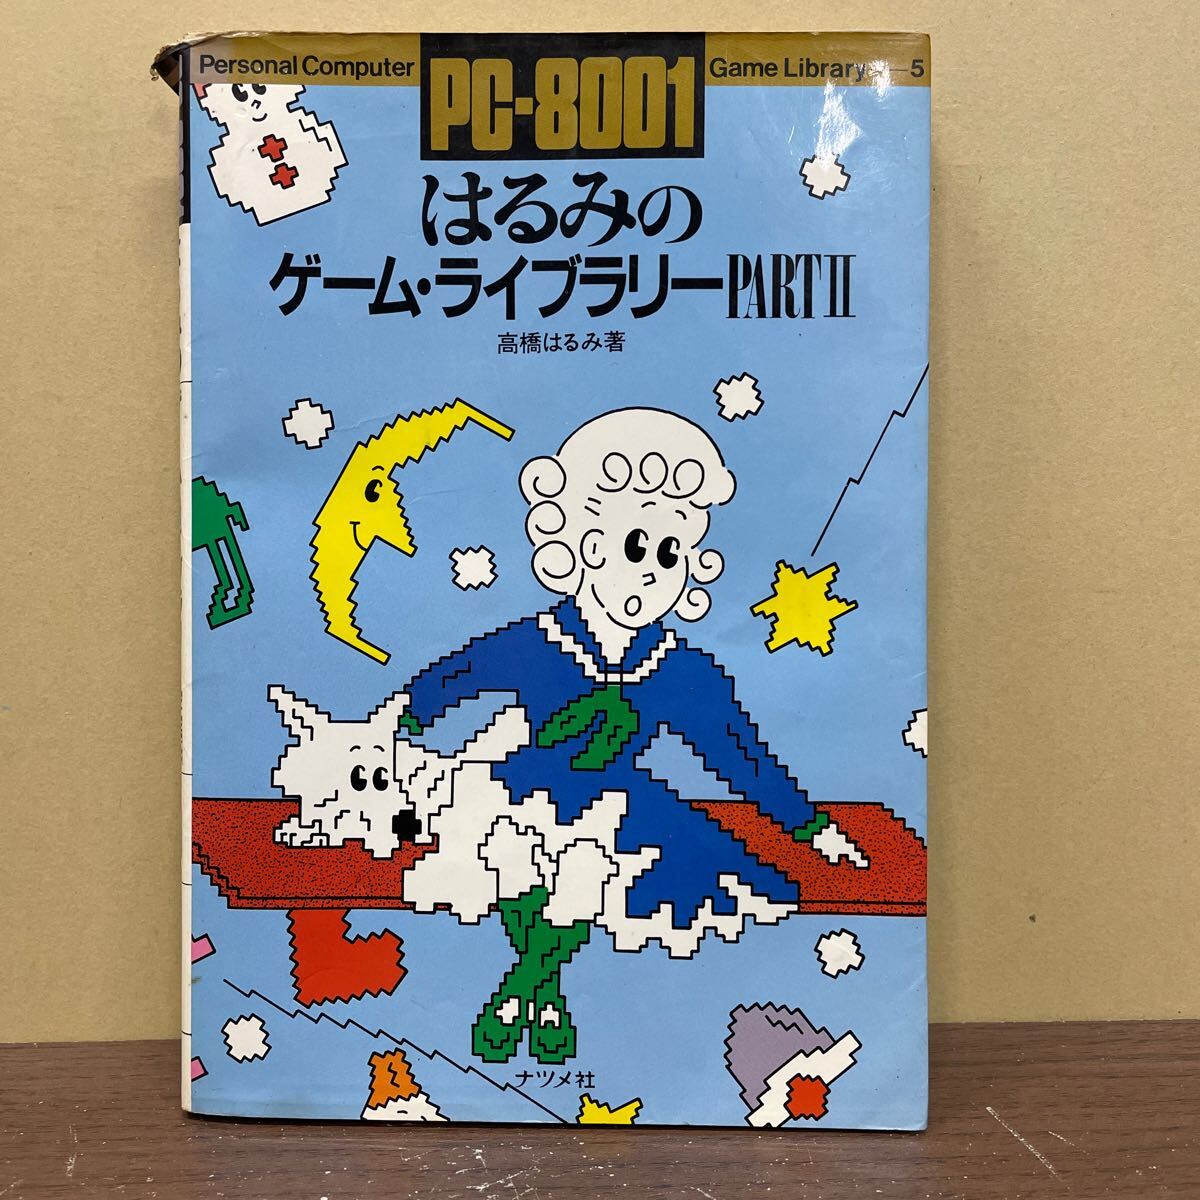 PC-8001 is ... game * library PARTⅡ height . is ../ work .. speed Hara / cover . jujube company 1983 year / secondhand book / cover scorch some stains destruction scratch / small .. scorch some stains 